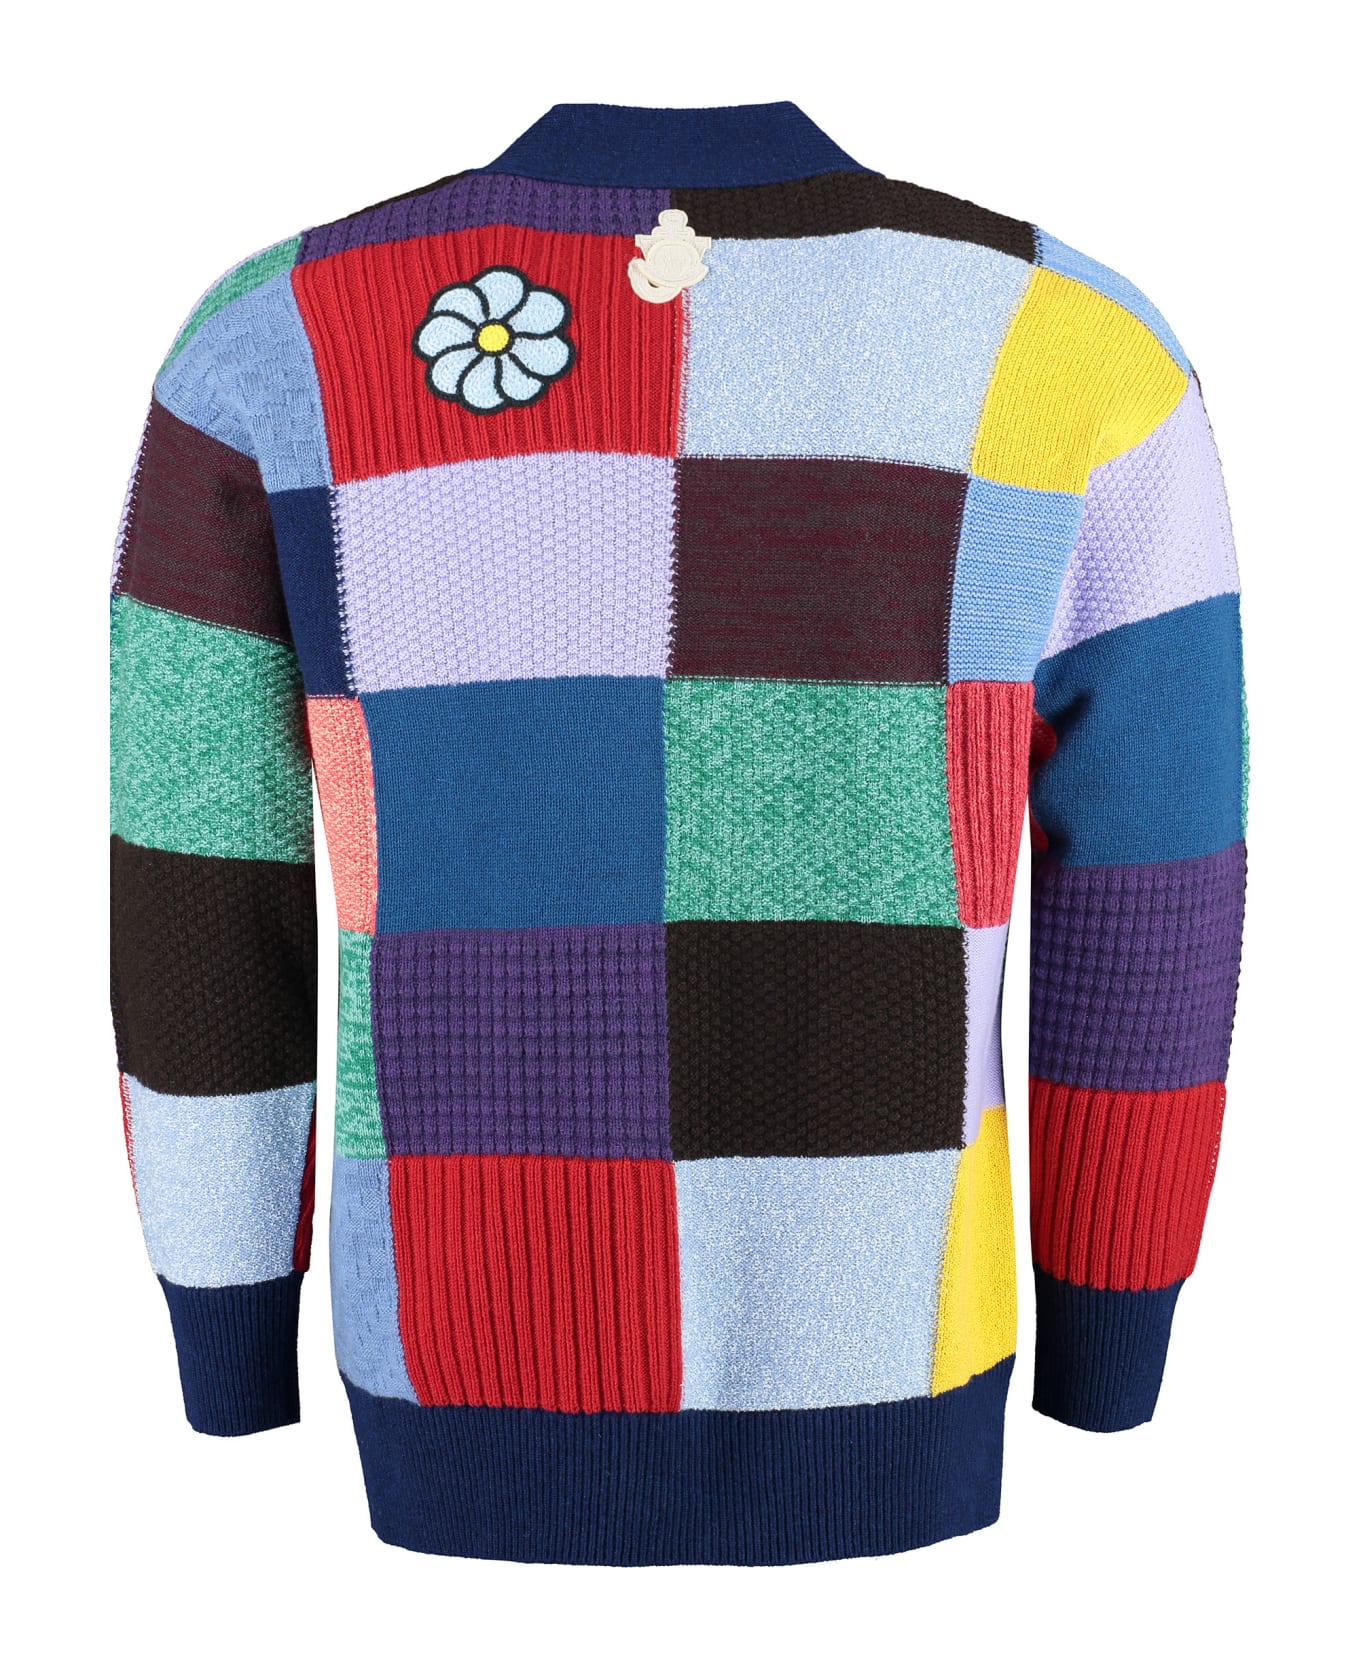 Moncler Genius 1 Moncler Jw Anderson - Wool And Cashmere Cardigan - Multicolor カーディガン